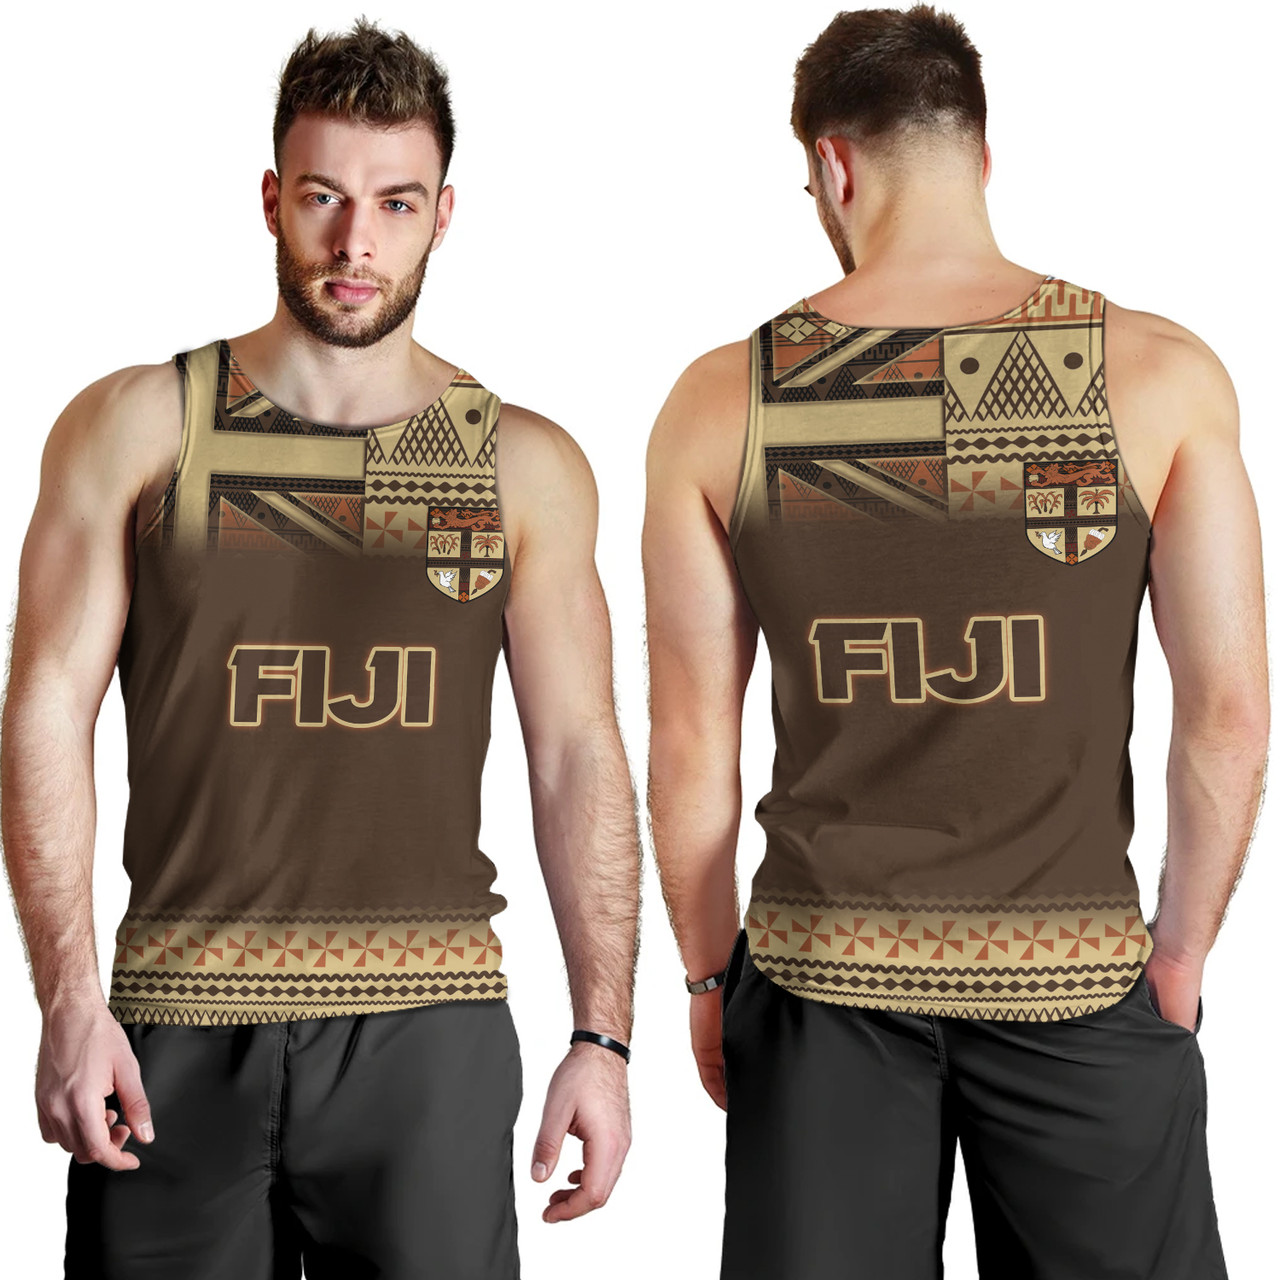 Fiji Tank Top Flag Color With Traditional Patterns Ver 2